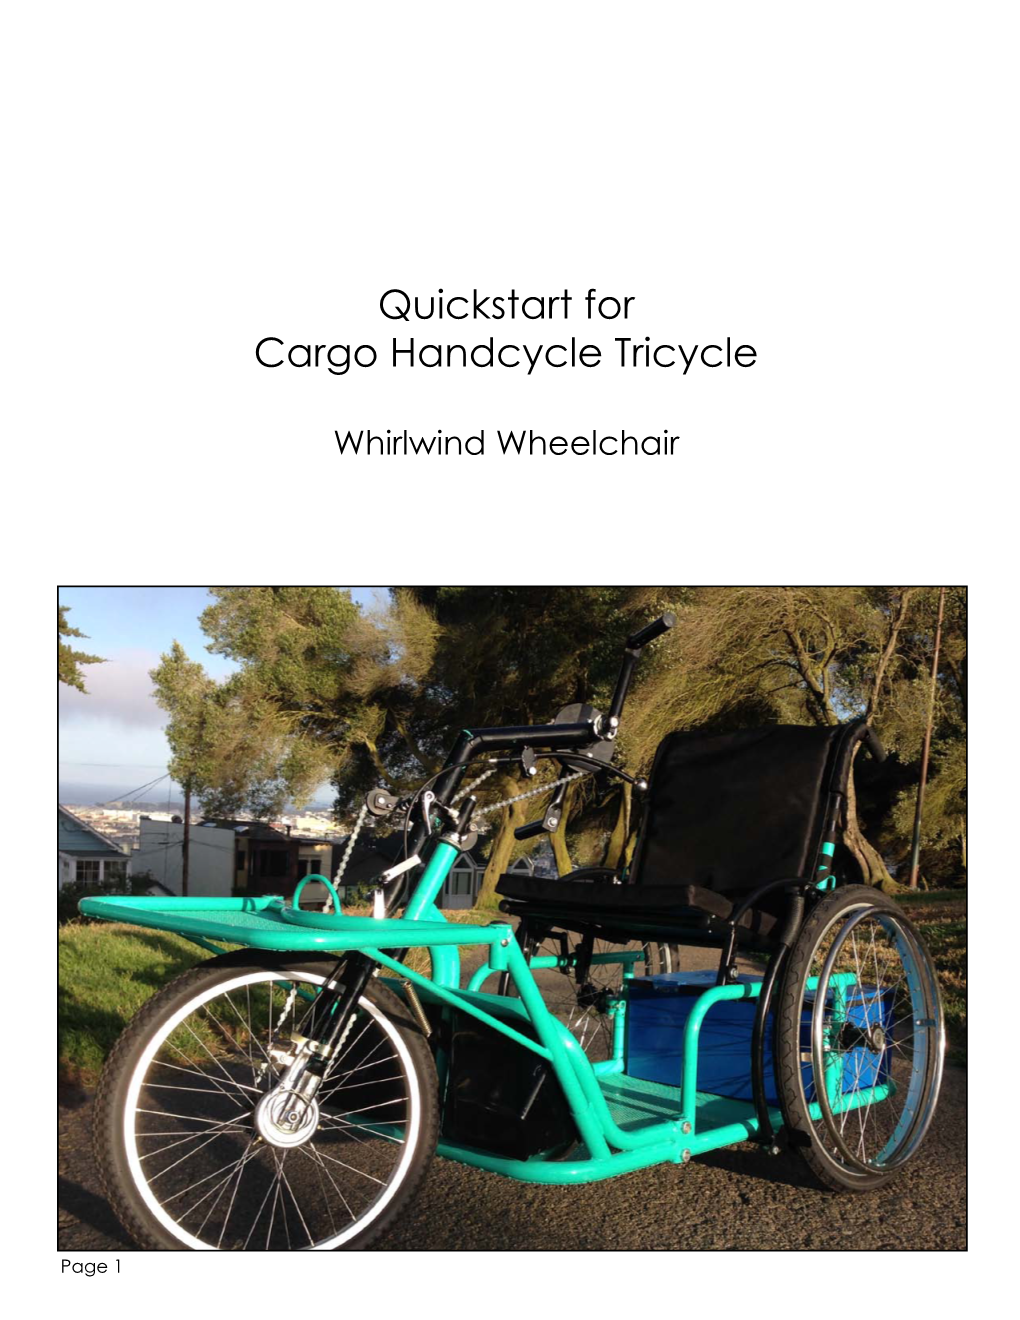 Quickstart for Cargo Handcycle Tricycle